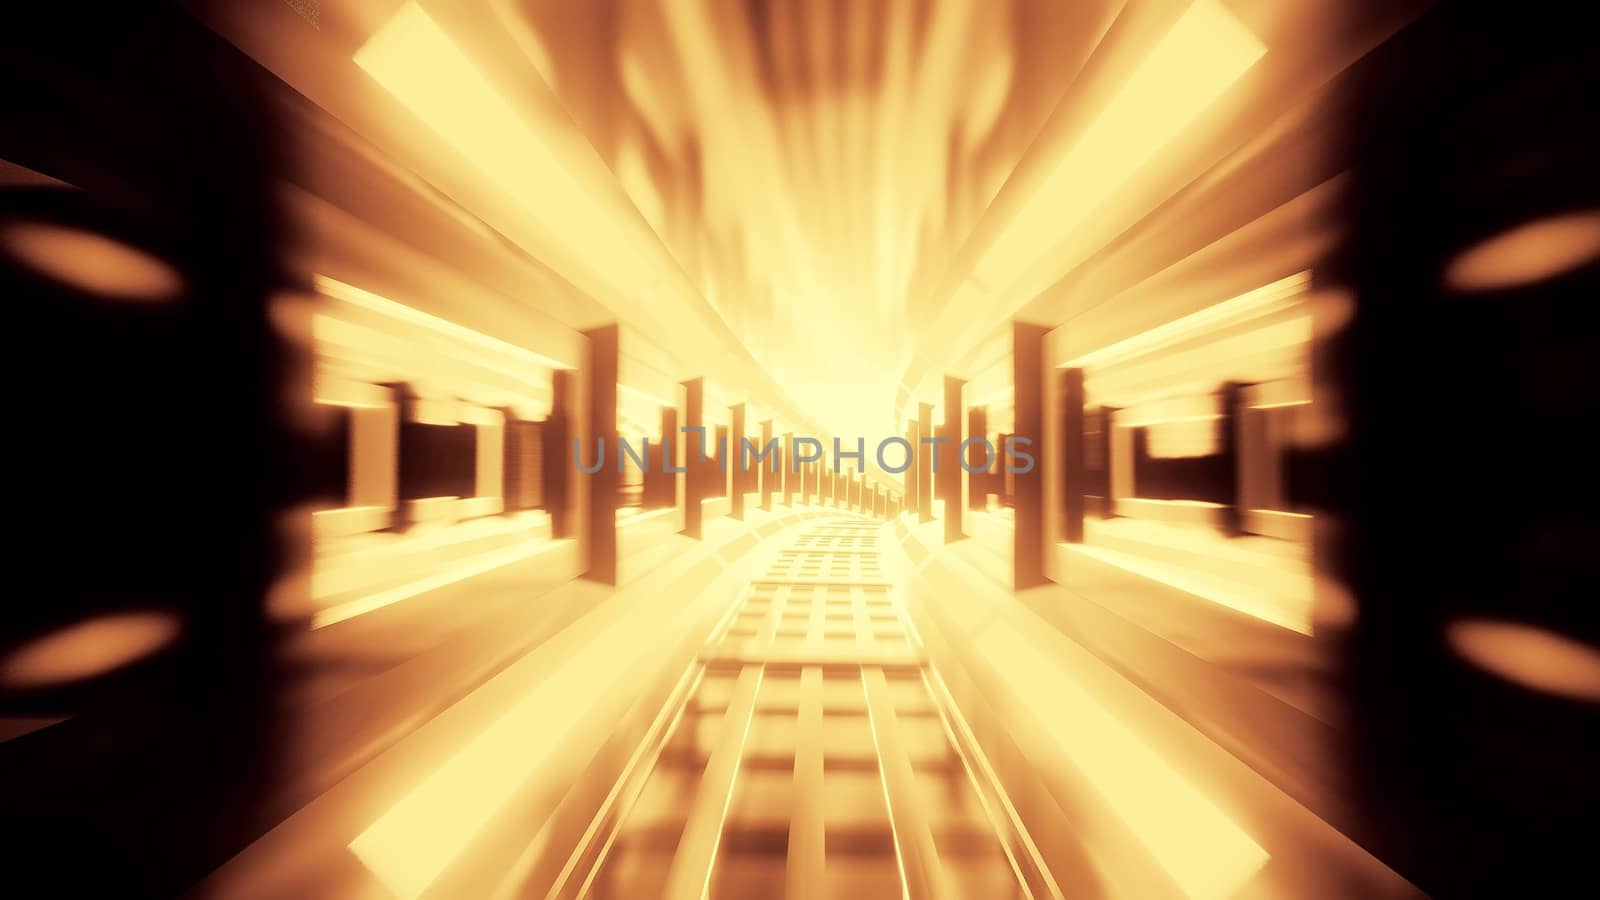 glowing tunnel corridor 3d illustration background wallpaper, dying / end of life stock 3d rendering design